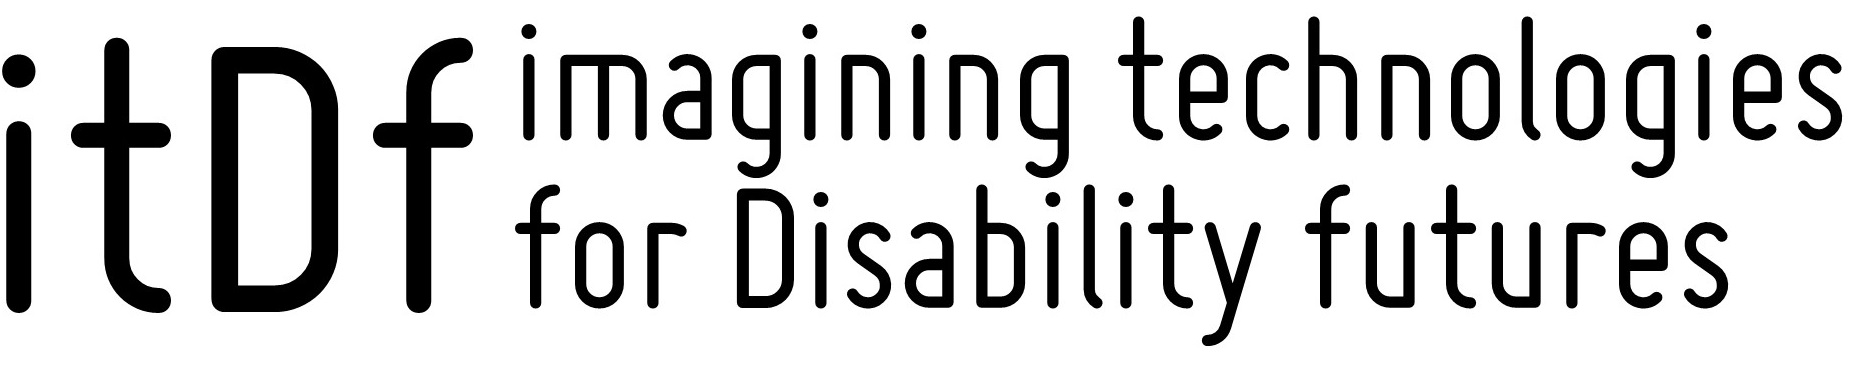 Imagining Technologies for Disability Futures